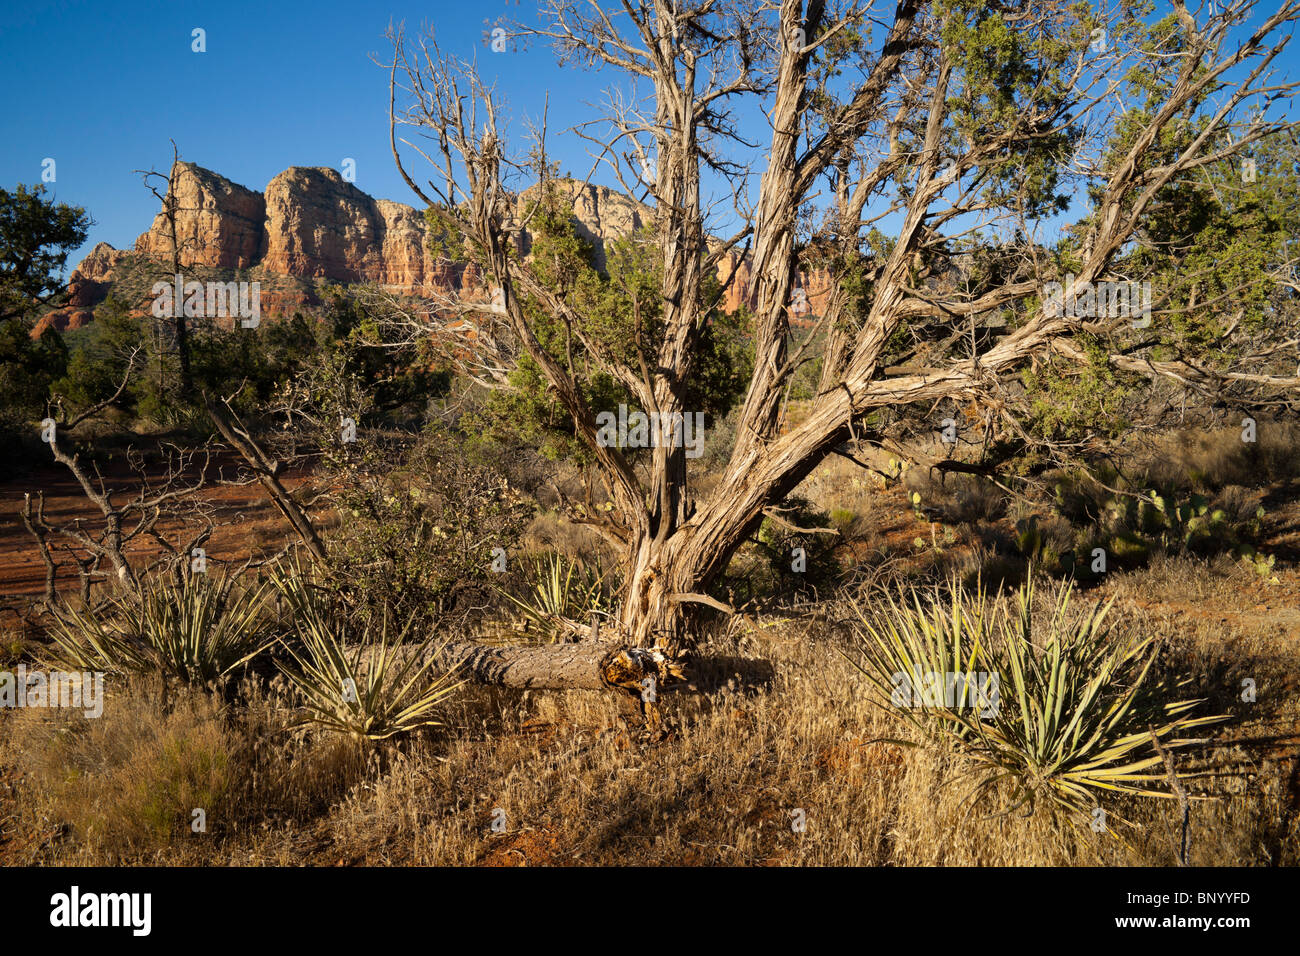 Sedona Arizona - view from Little Horse Trailhead with Submarine Rock, Chicken Point and desert vegetaion Stock Photo